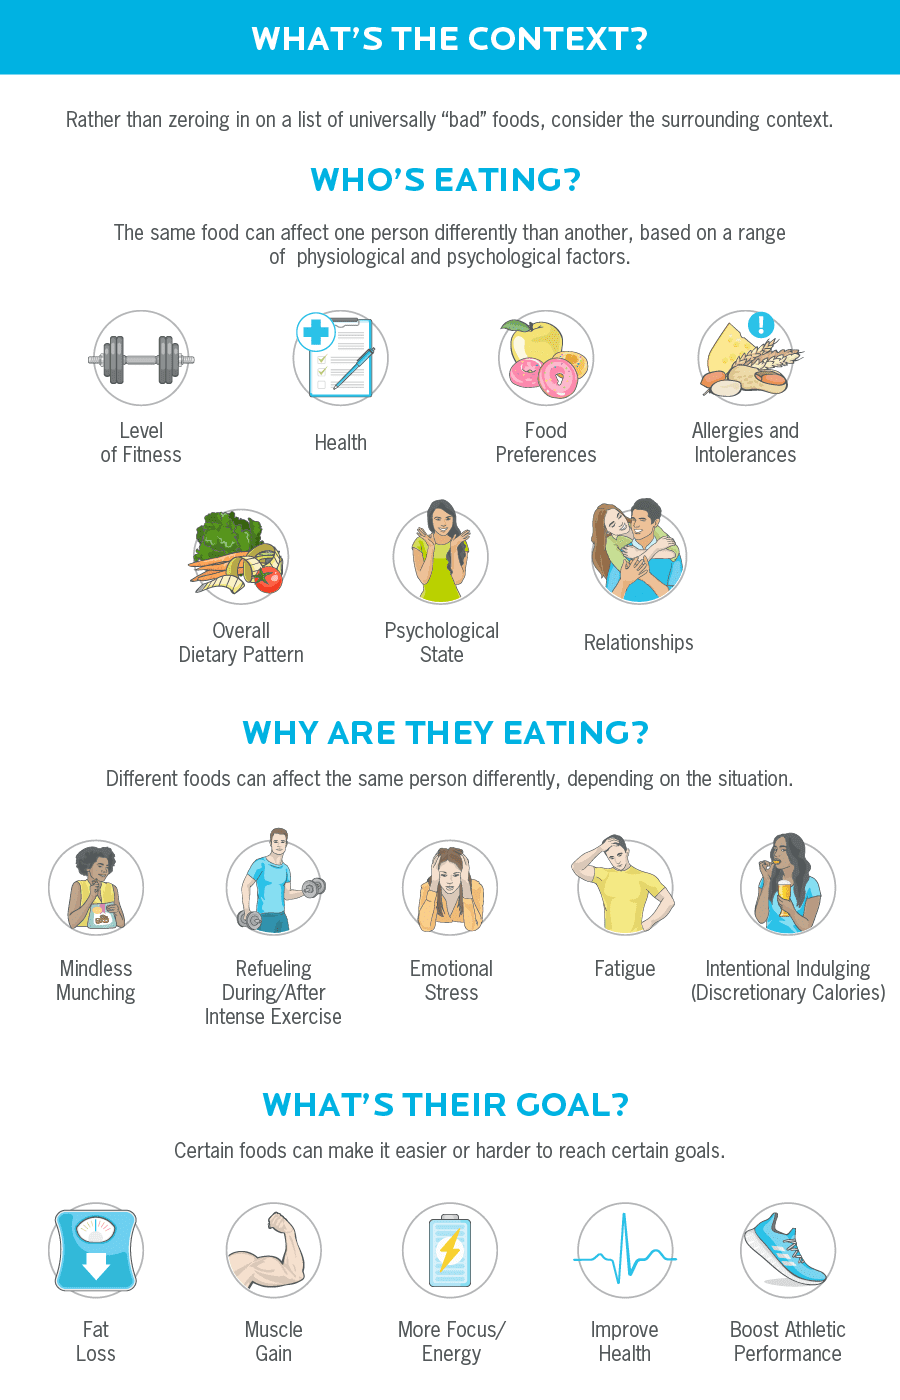 Illustration showing factors to consider when choosing foods such as who's eating, why they're eating and what's their goal.